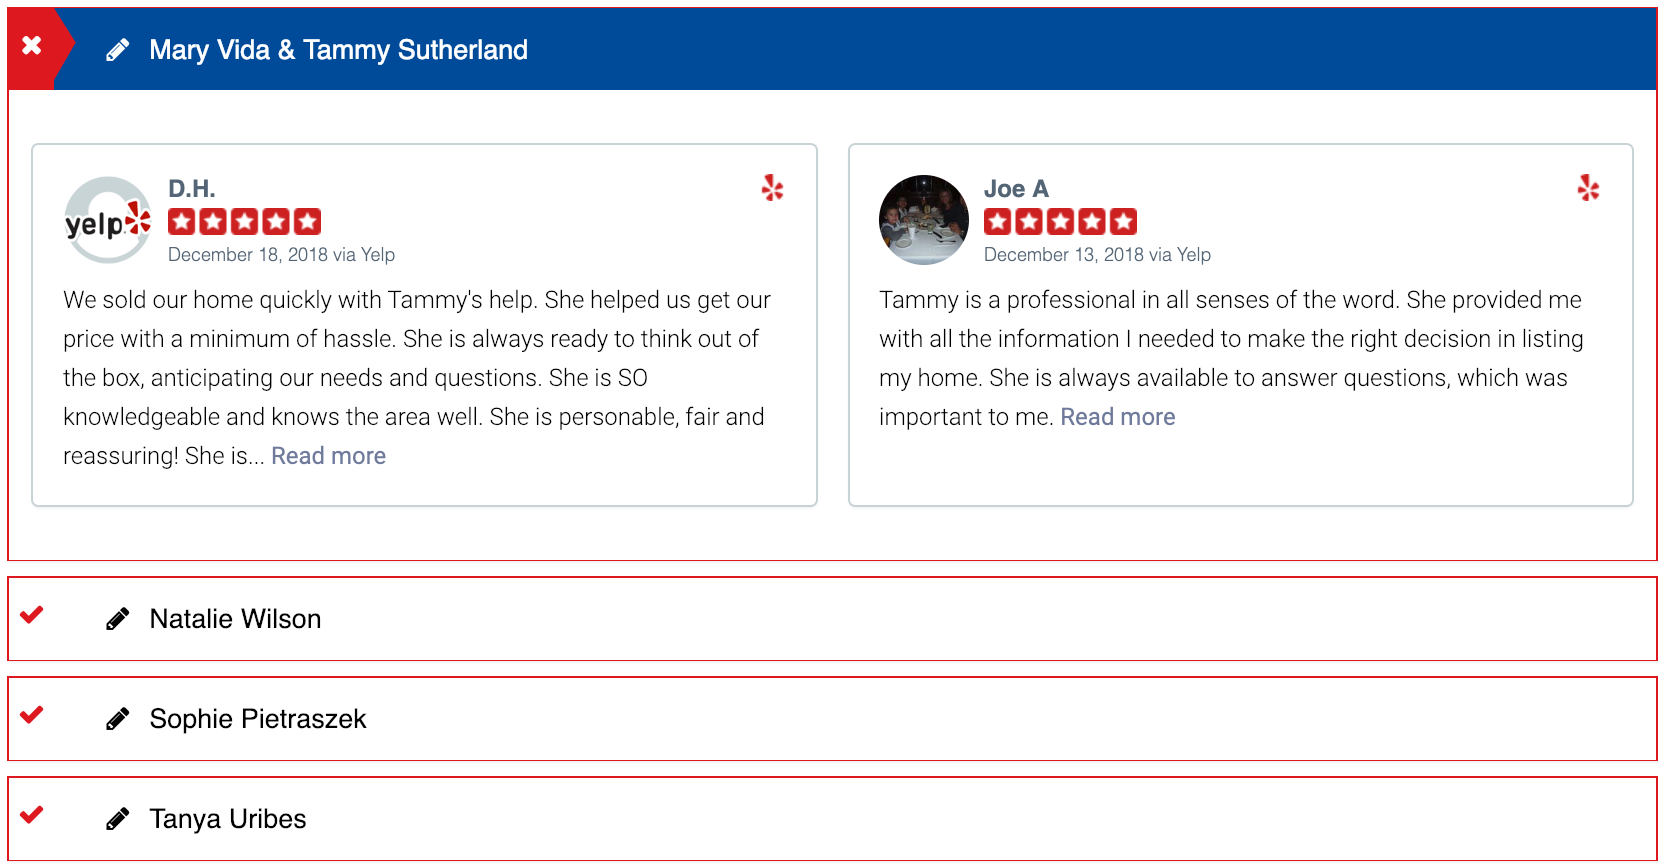 Image: Accordion Tab open to "Mary Via & Tammy Sutherland." Yelp Review from D.H.: "We sold our home quickly with Tammy's help. She helped us get our price with a minimum of hassle. She is always ready to think out of the box, anticipating our needs and questions. She is SO knowledgeable and knows the area well. She is personable, fair and reassuring!" Yelp review from Jow A. "Tammy is a professional in all senses of the word. She provided me with all the information I needed to make the right decision in listing my home. She is always available to answer questions, which was important to me." 